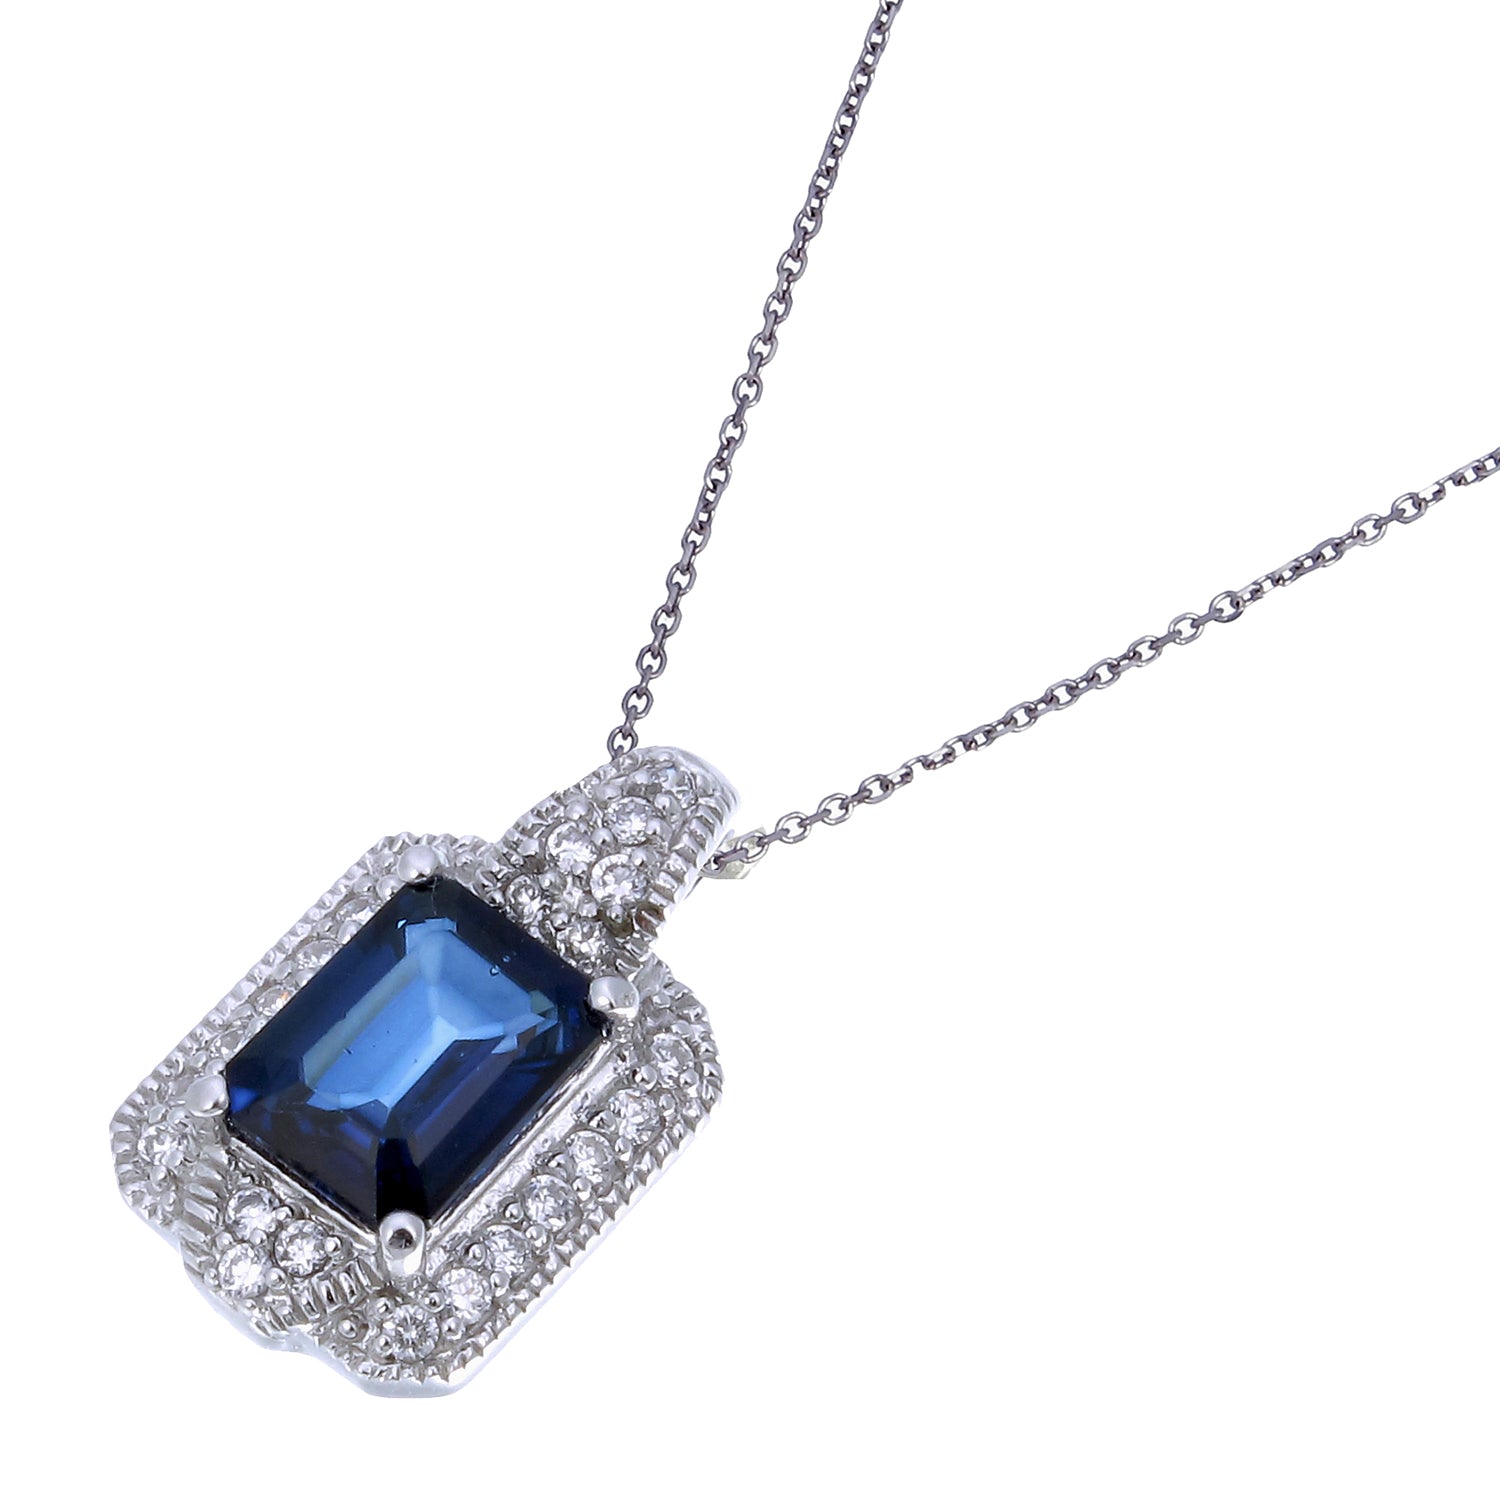 1.10 cttw Pendant Necklace, Created Sapphire Emerald Shape Pendant Necklace for Women in .925 Sterling Silver with Rhodium, 18 Inch Chain, Prong Setting